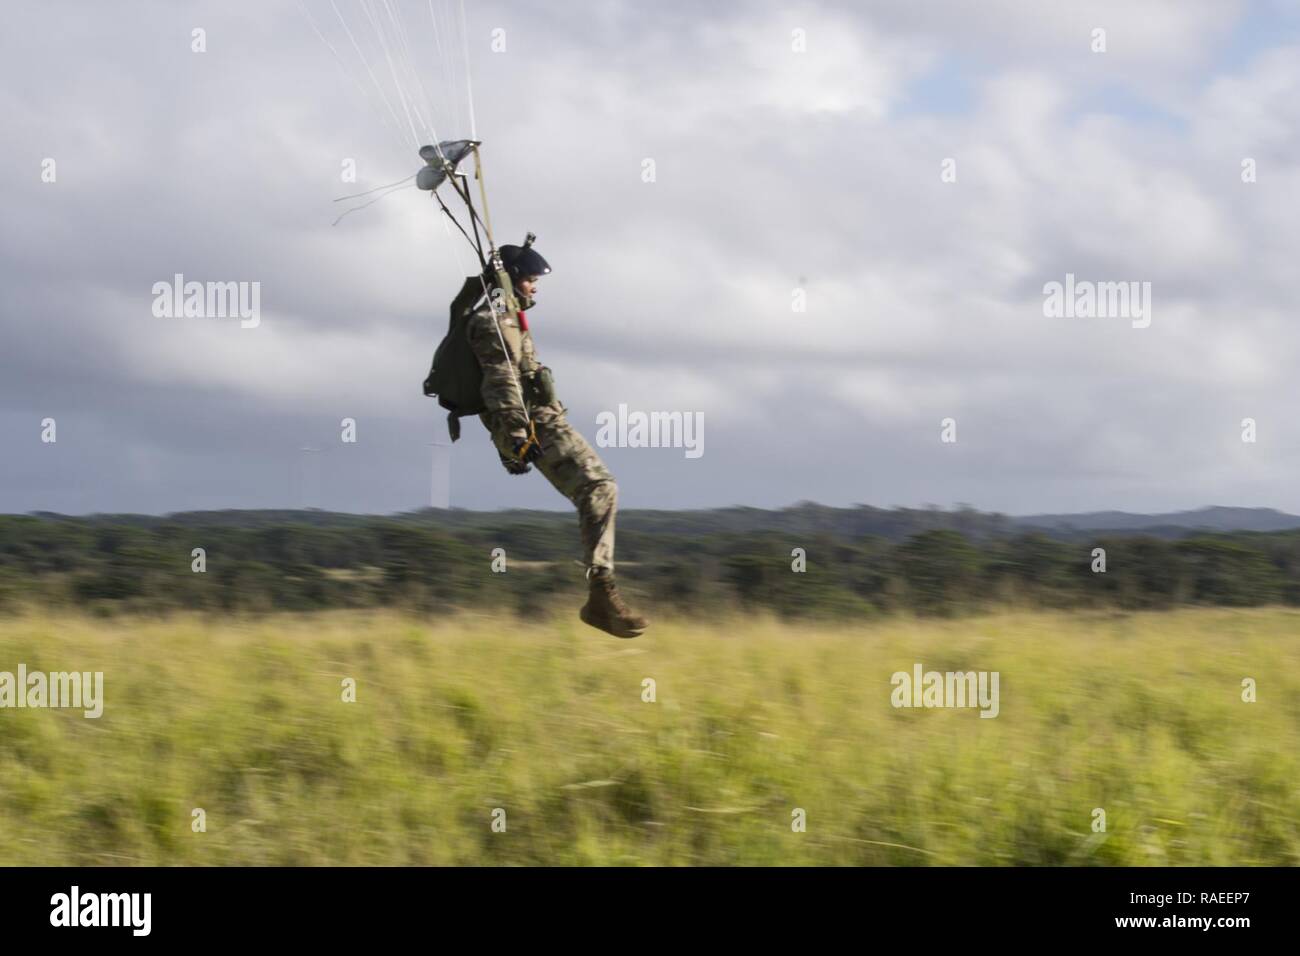 NORTH SHORE, Hawaii (Jan. 26, 2017) Sgt. 1st Class Anthony Rucker, assigned to Special Operations Command Pacific, prepares to land during airborne training operations, Jan. 26, 2017. As a sub-unified command of U.S. Special Operations Command under the operational control of U.S. Pacific Command, SOCPAC serves as the functional component for all special operation missions deployed throughout the Indo-Asia-Pacific region. Stock Photo